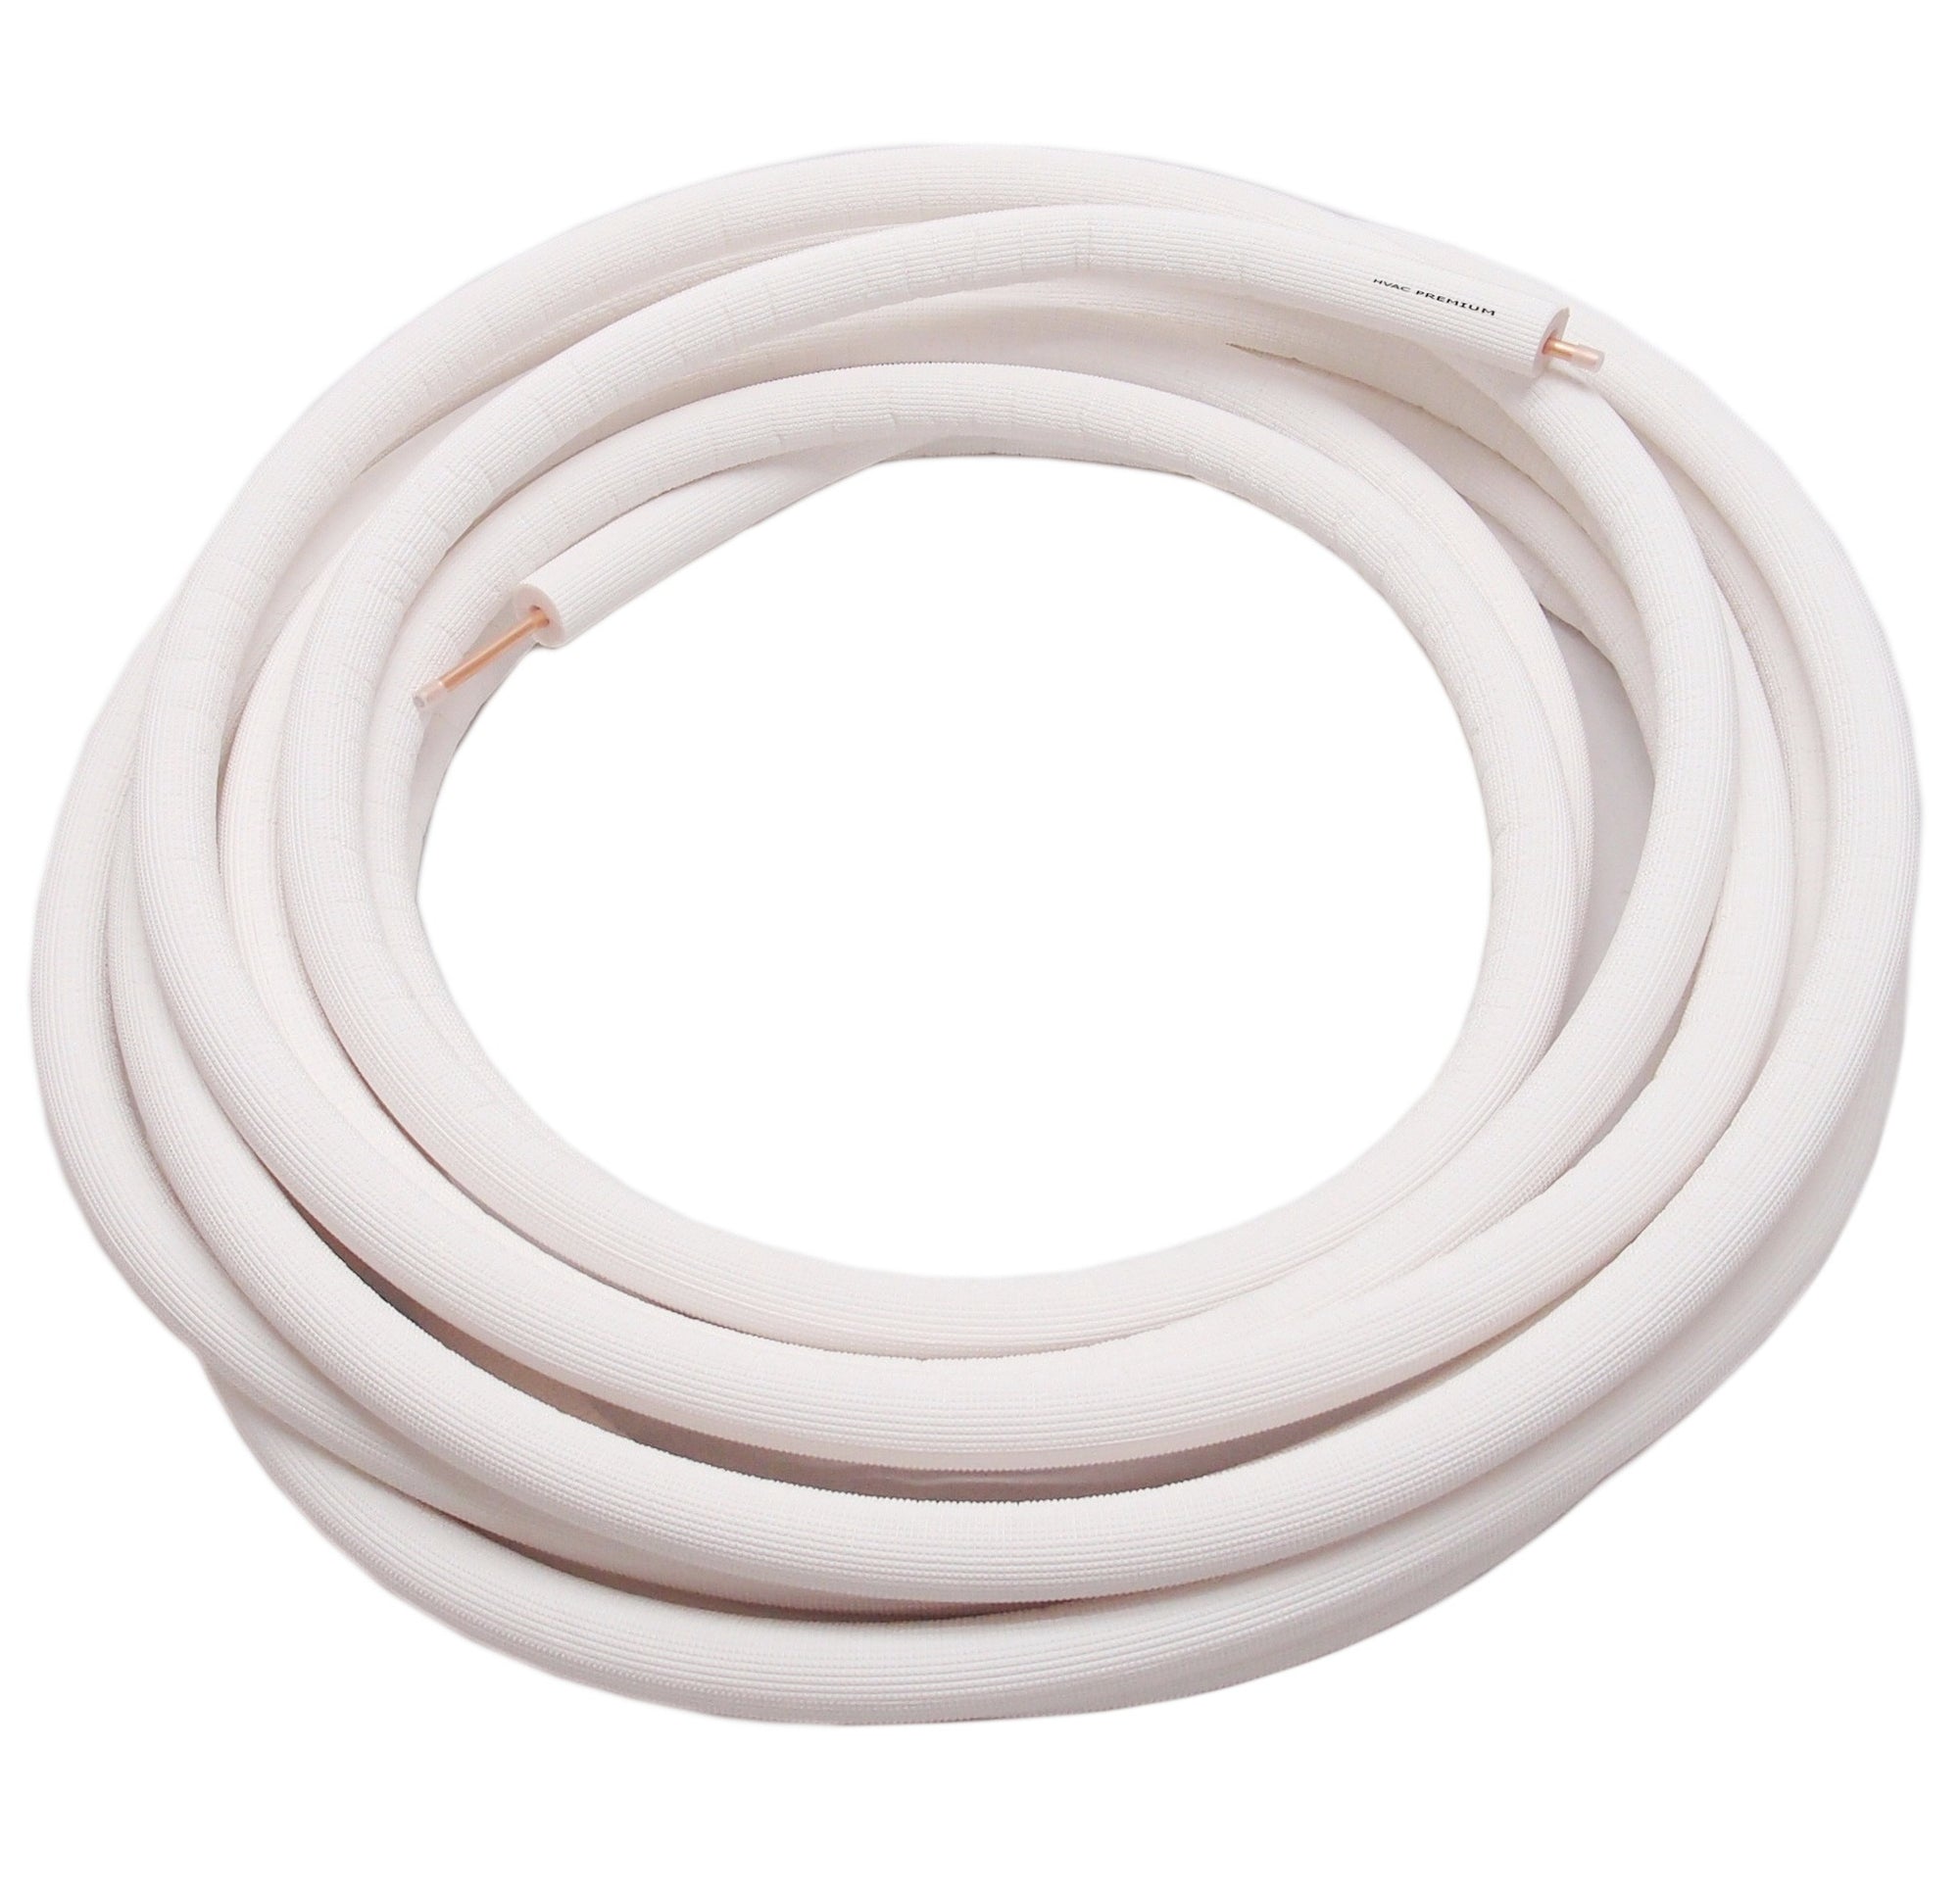 3/8" Insulated Copper Coil Line - Seamless Pipe Tube for HVAC, Refrigerant - 1/2" White Insulation - 50' Long